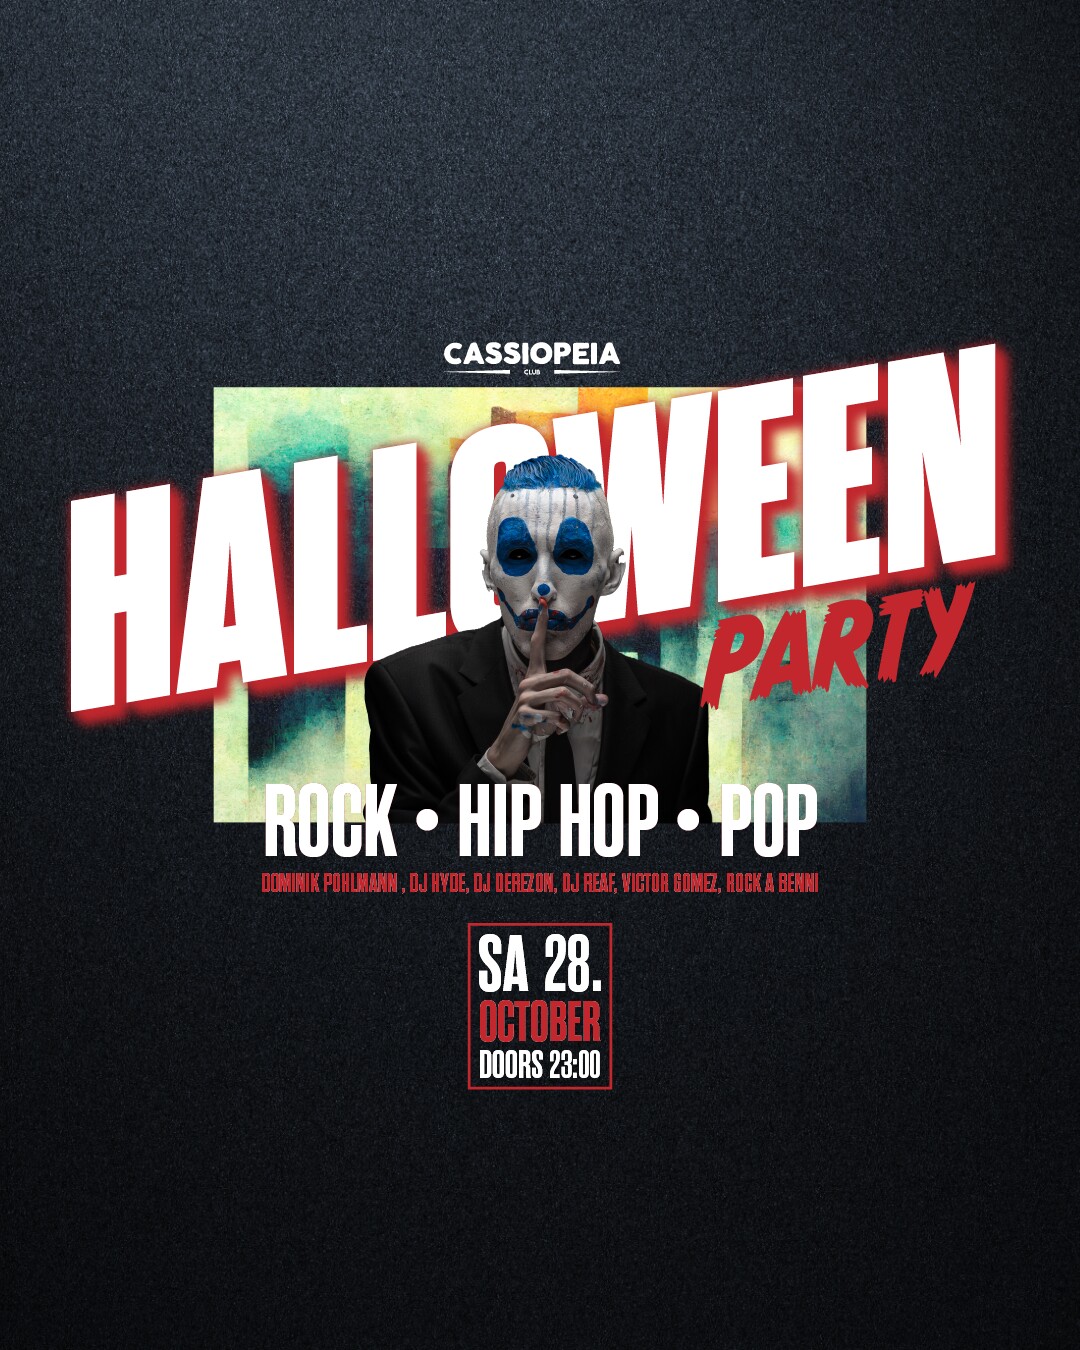 Cassiopeia Berlin Cassiopeia Berlin Halloween Party!